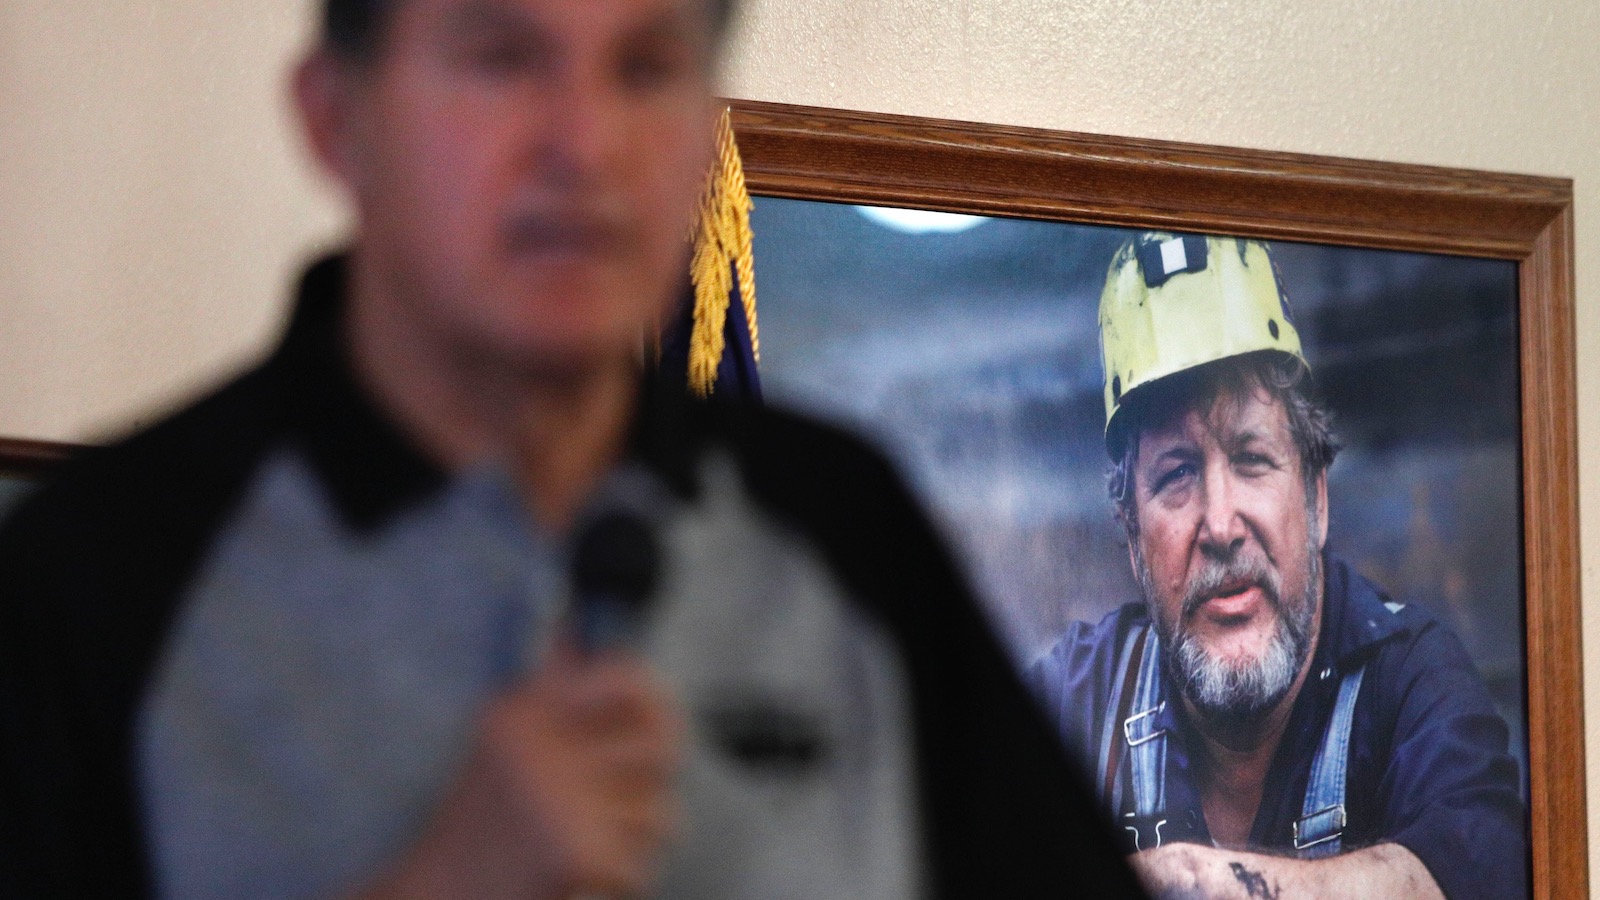 Senator Joe Manchin of West Virginia addresses a crowd while standing in front of a portrait of a coal miner.